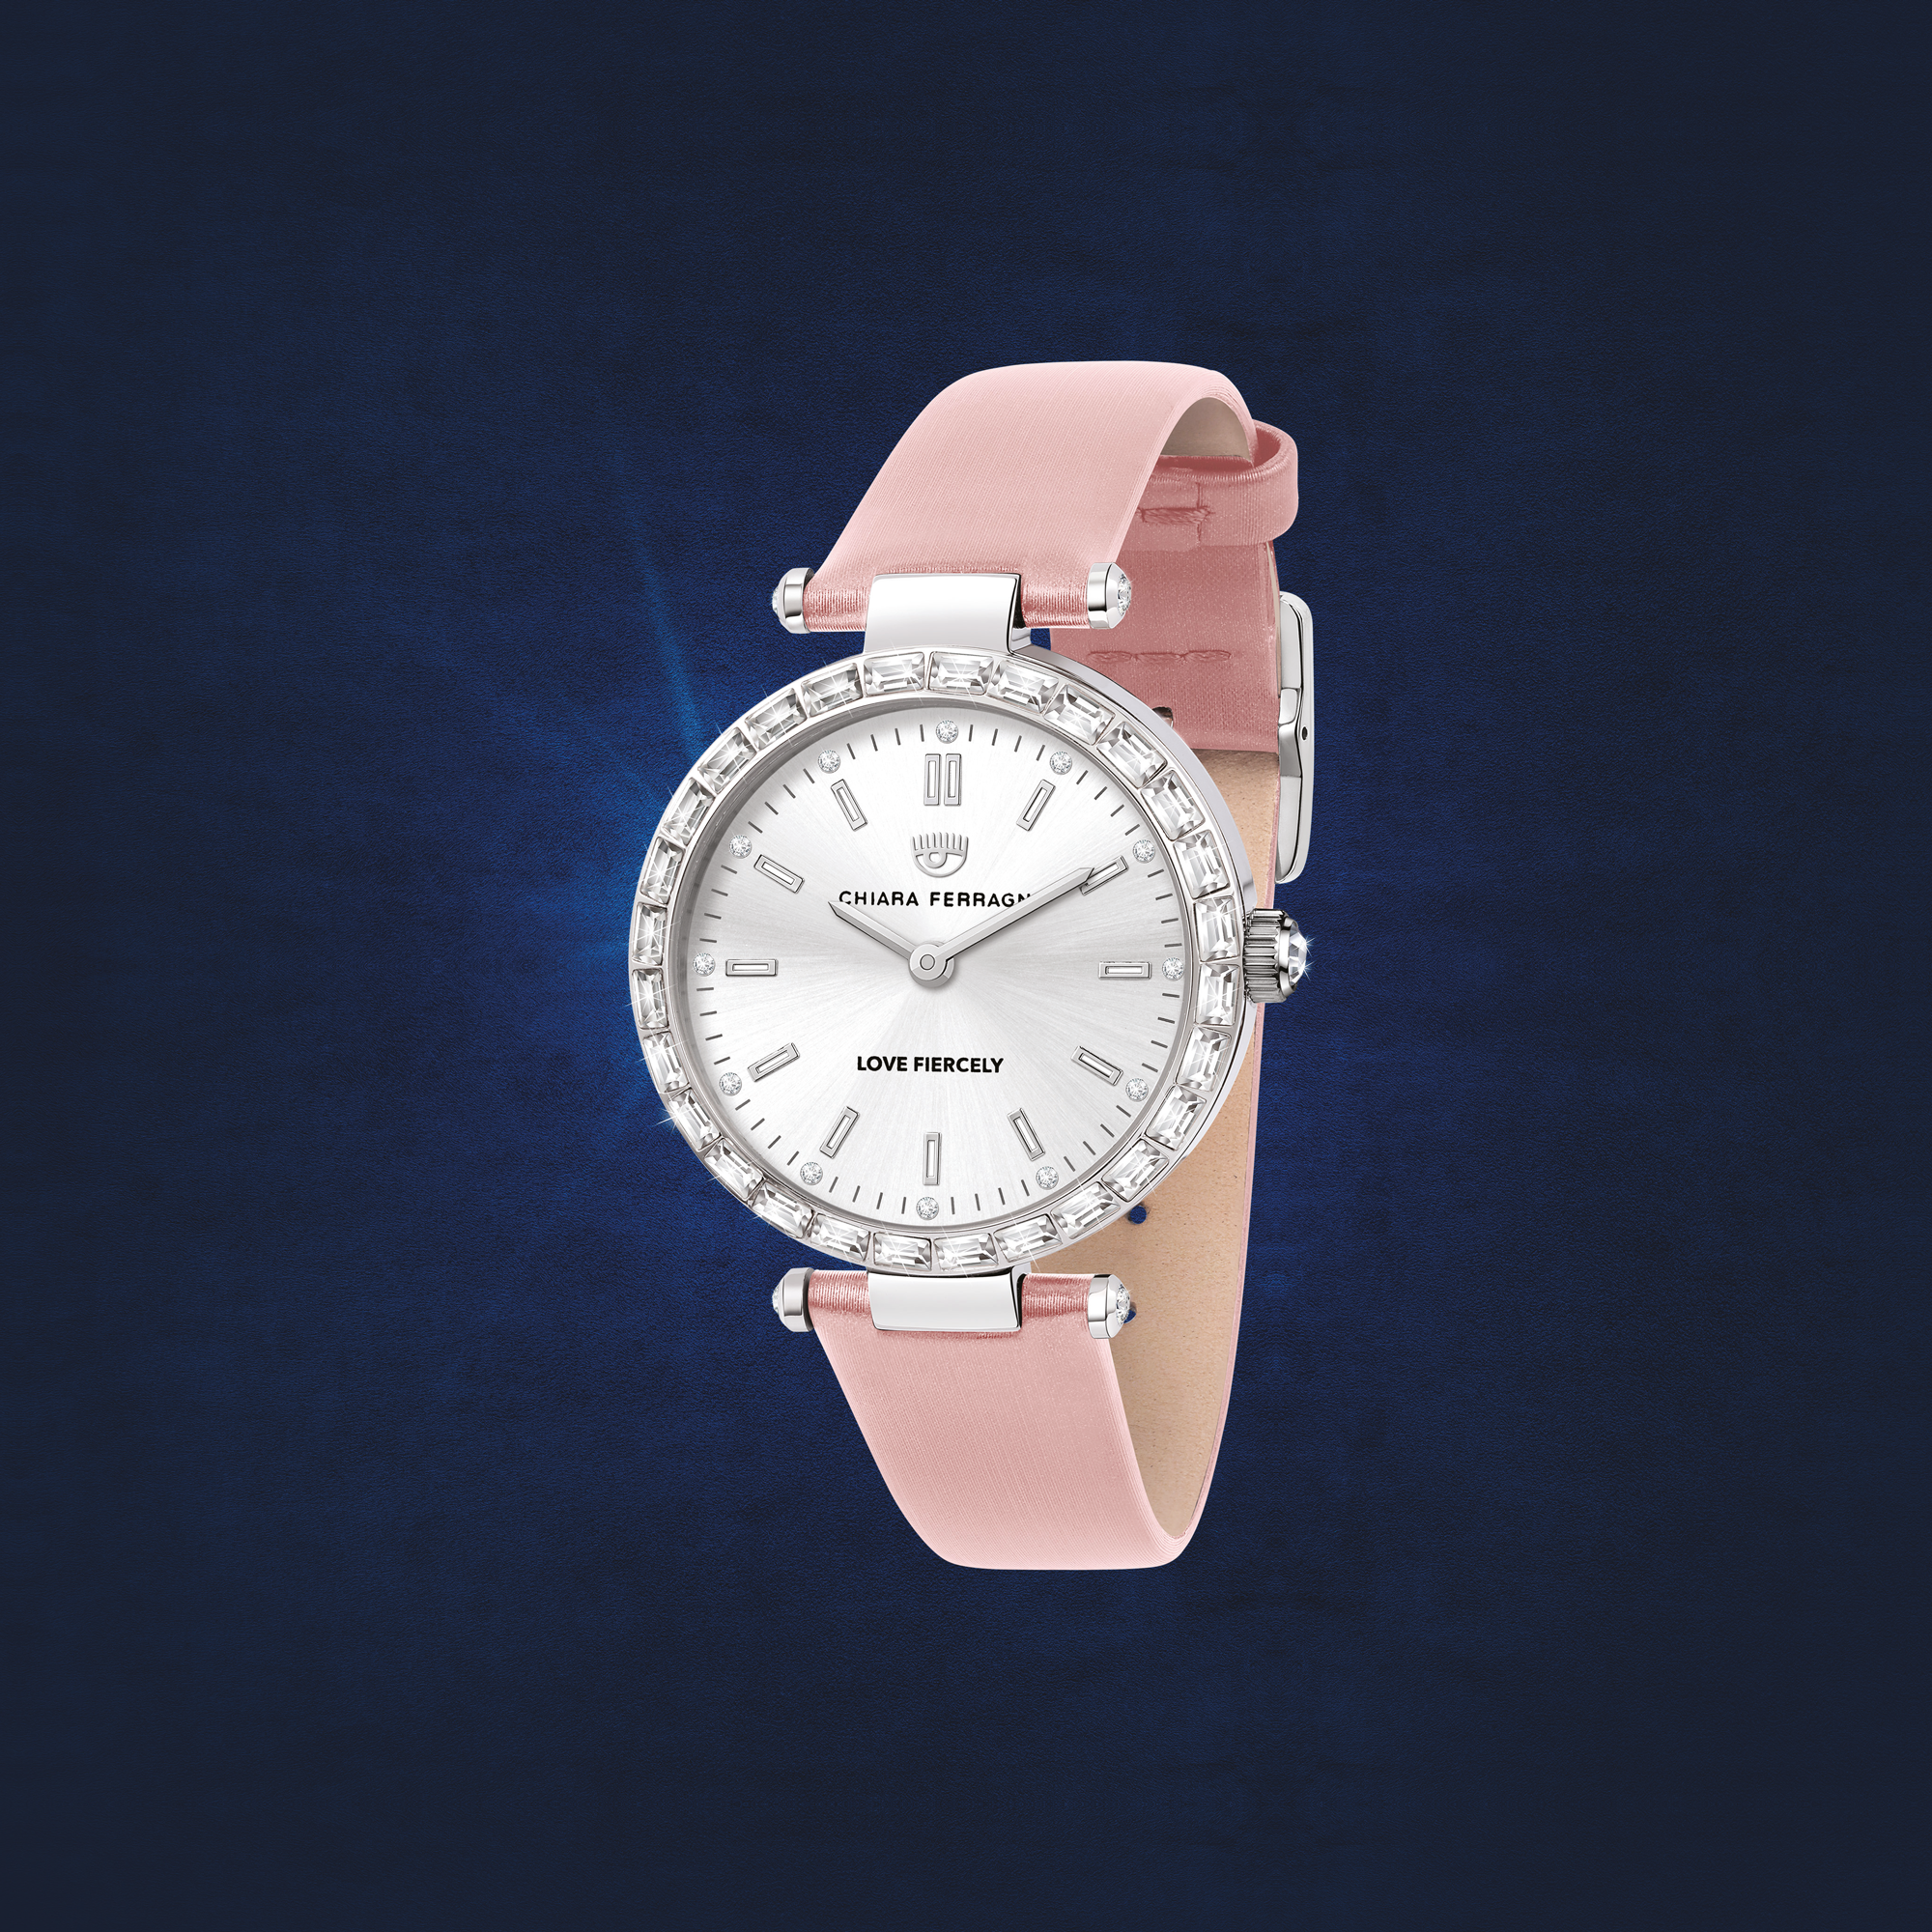 LADY LIKE 34MM 2H SIL WHITE DIAL PINK ST